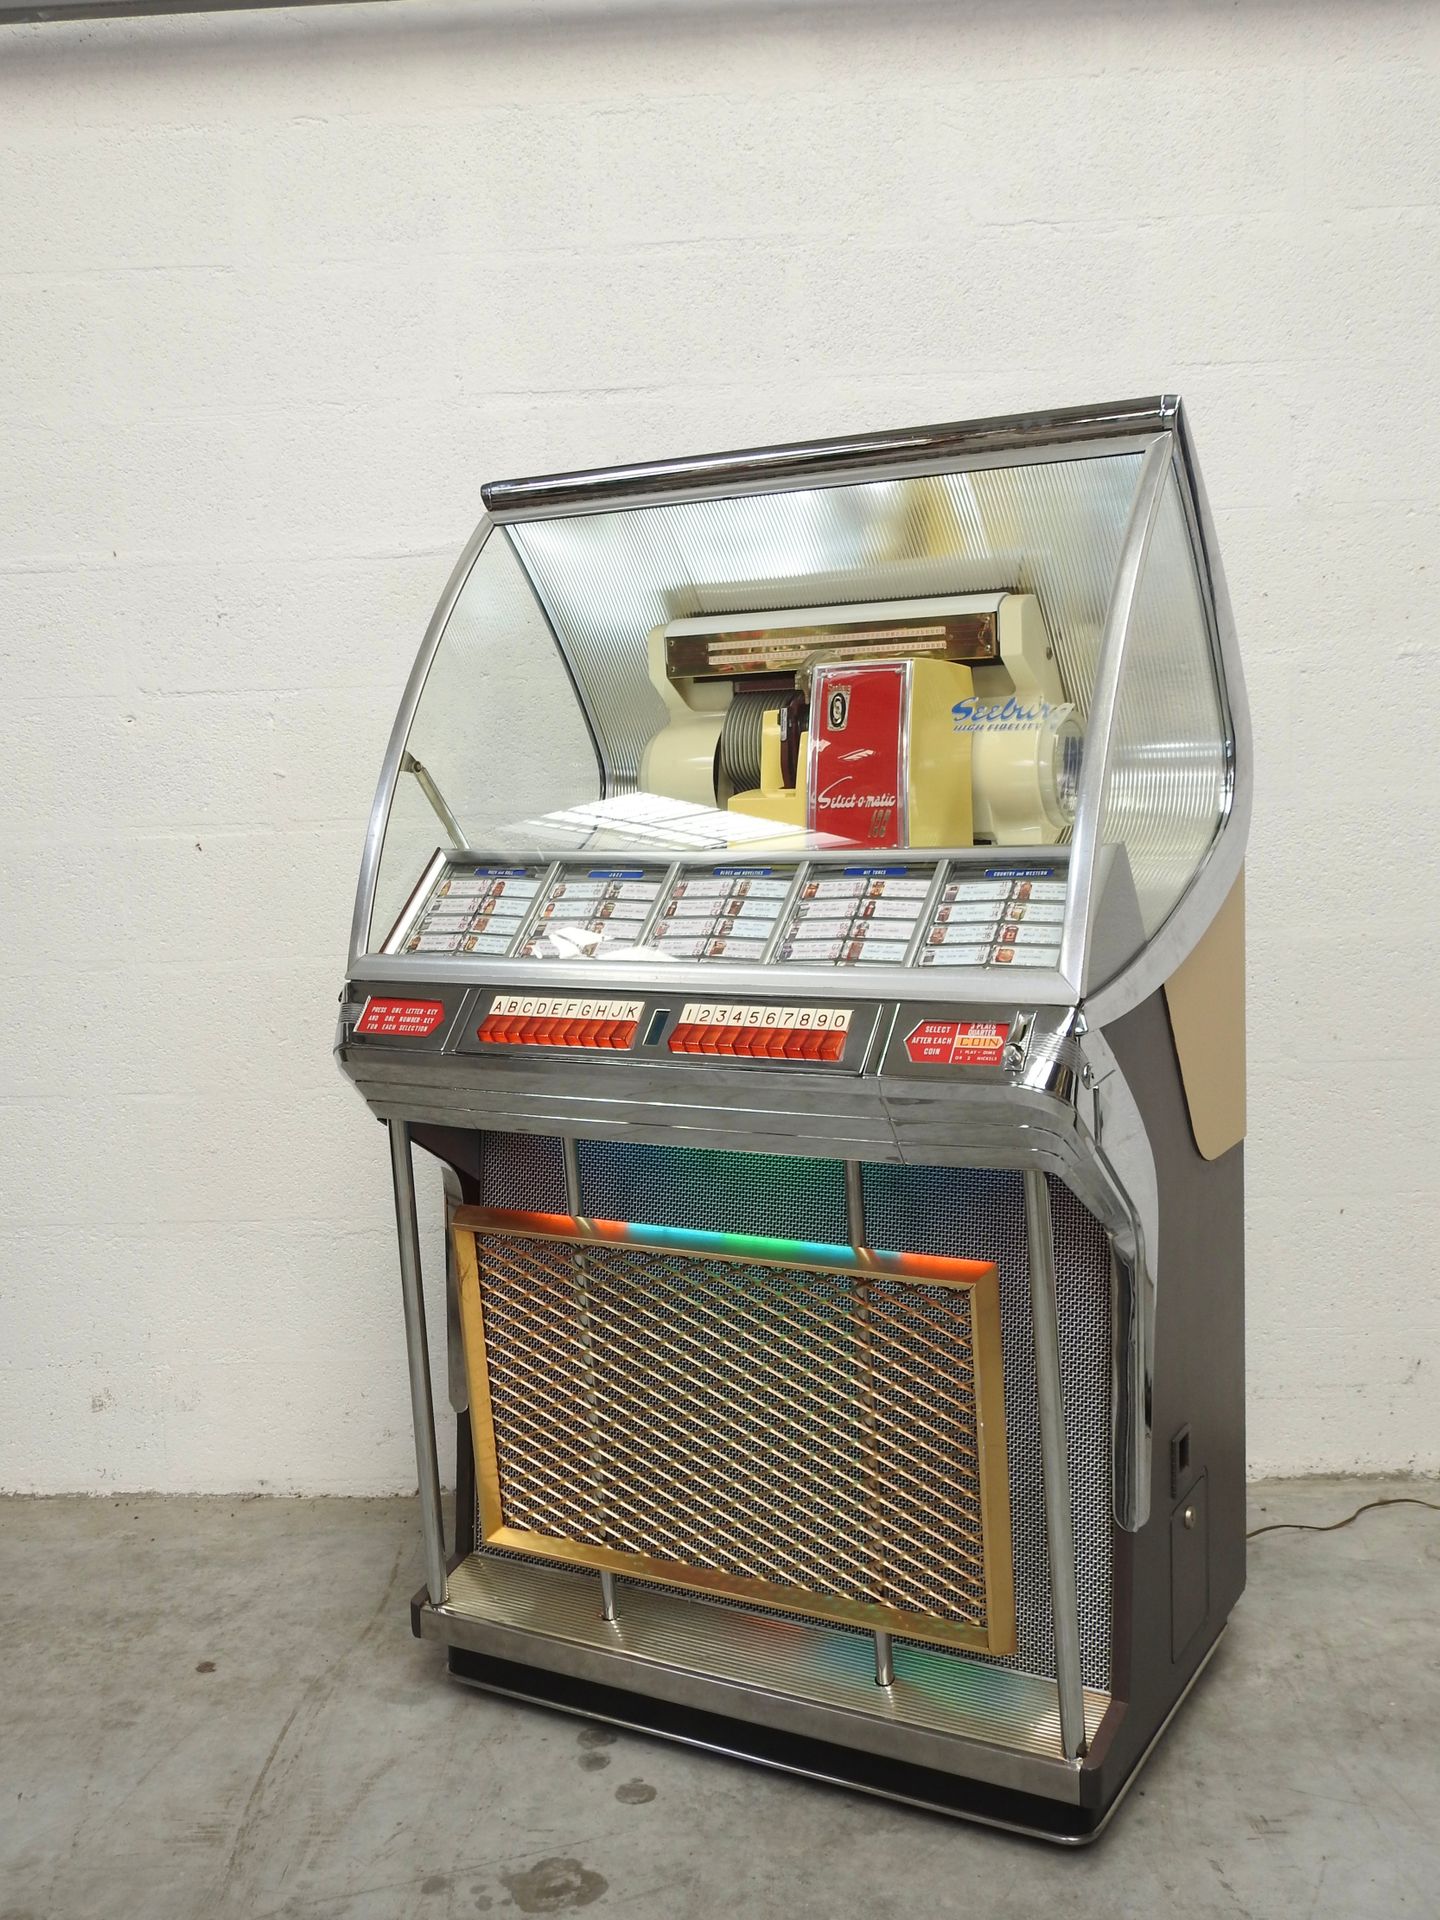 Null JUKEBOX

SEEBURG model 100 J, USA, 1955

Painted wood body with chromed and&hellip;